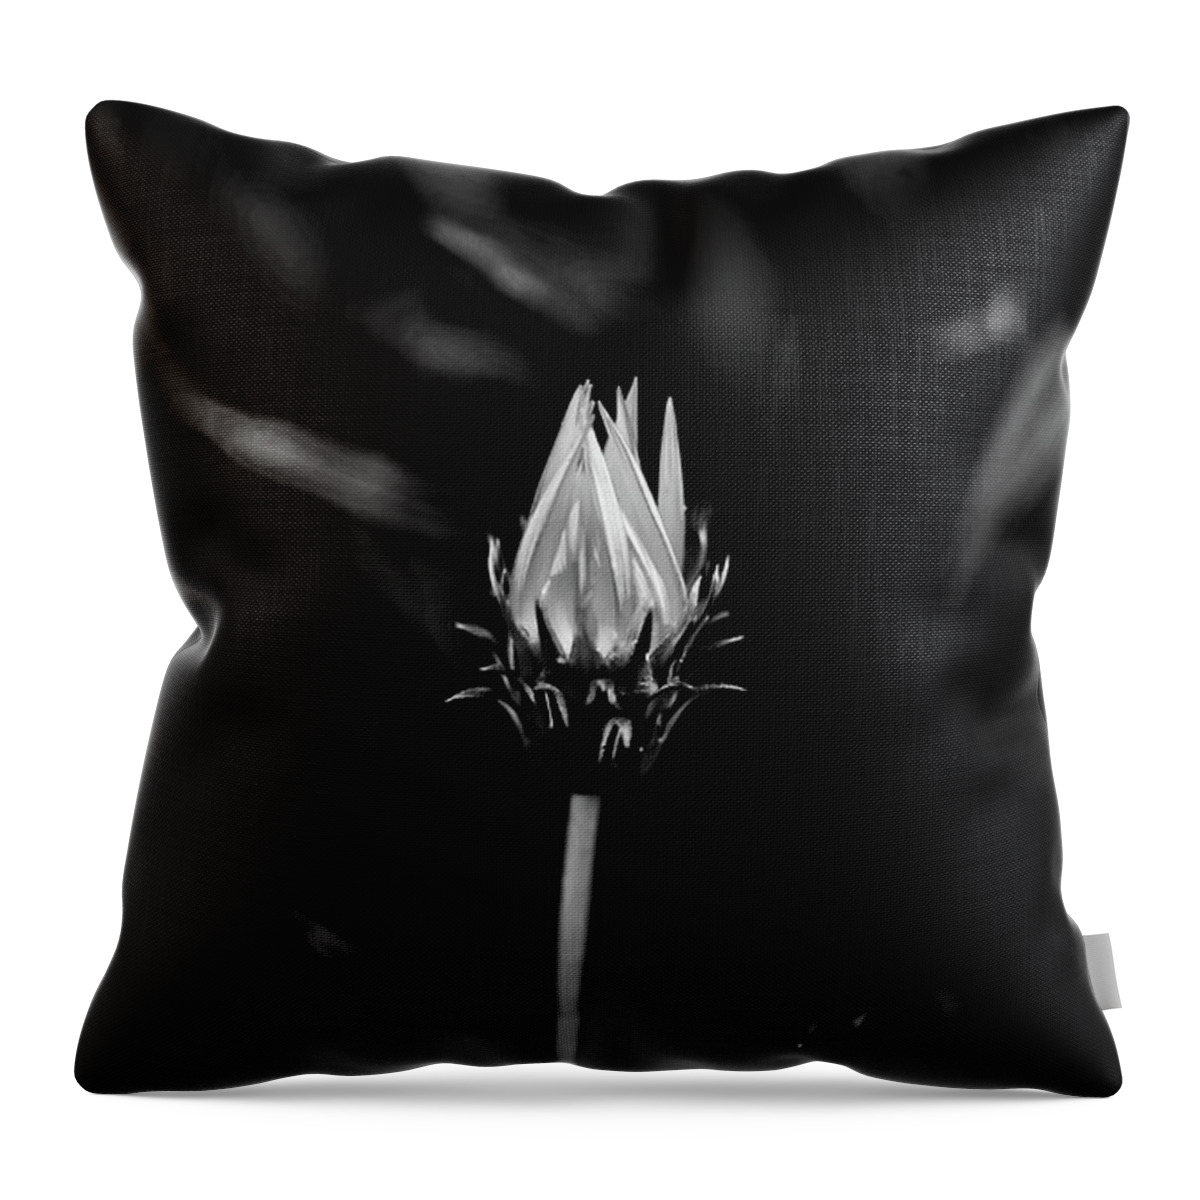 Beautiful Black And White Flower Throw Pillow featuring the photograph Only You by Az Jackson